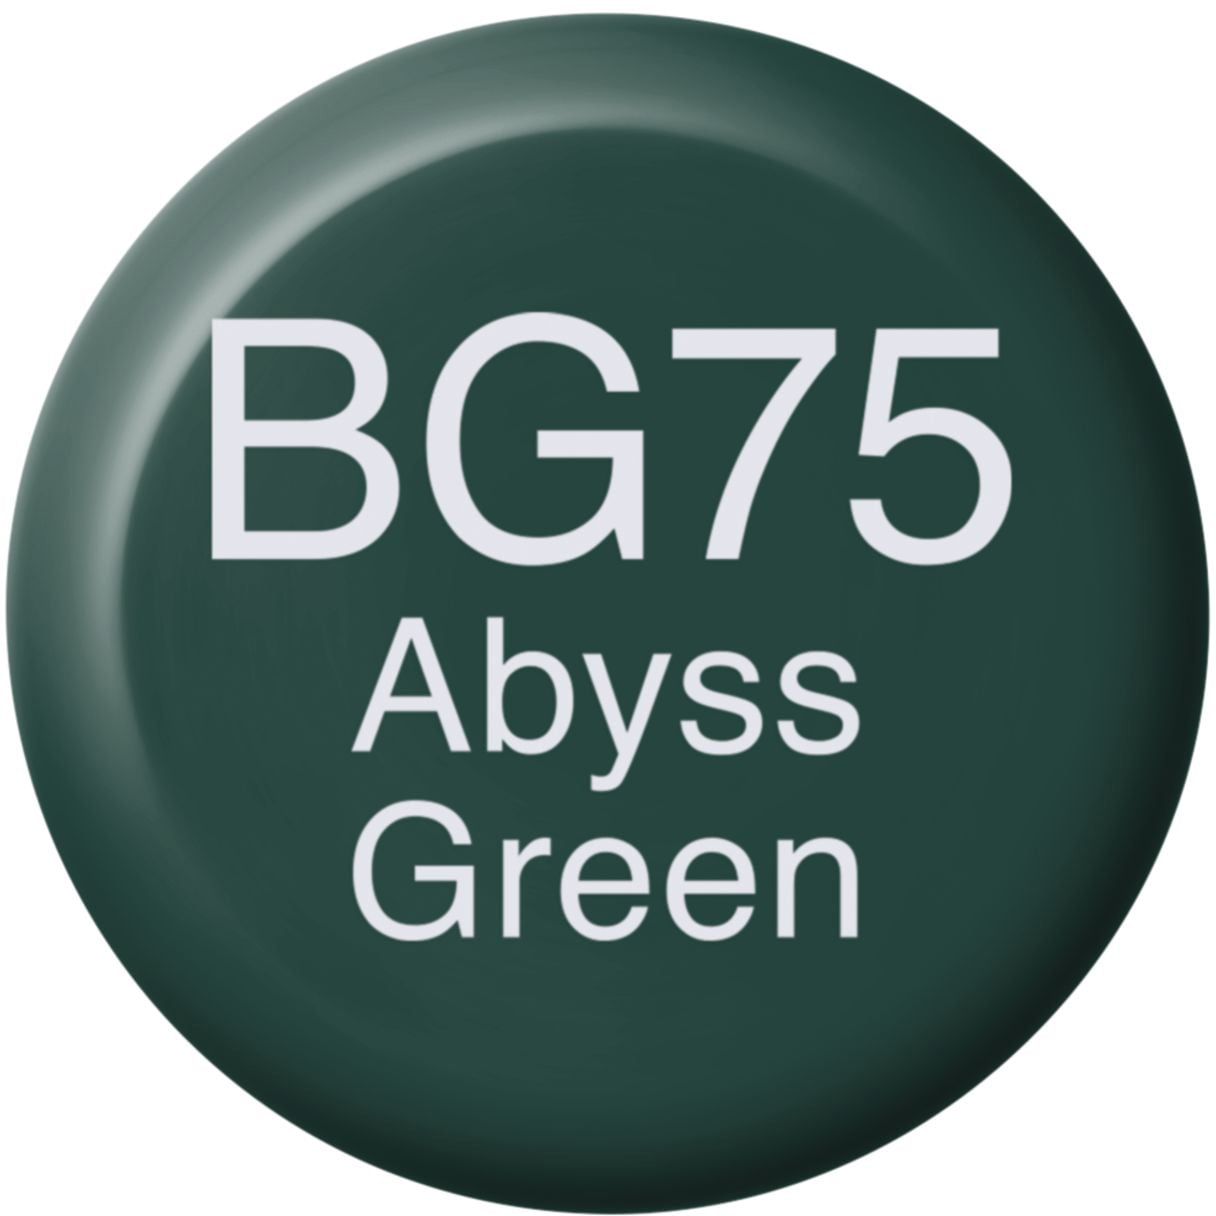 COPIC Ink Refill 21076318 BG75 - Abyss Green